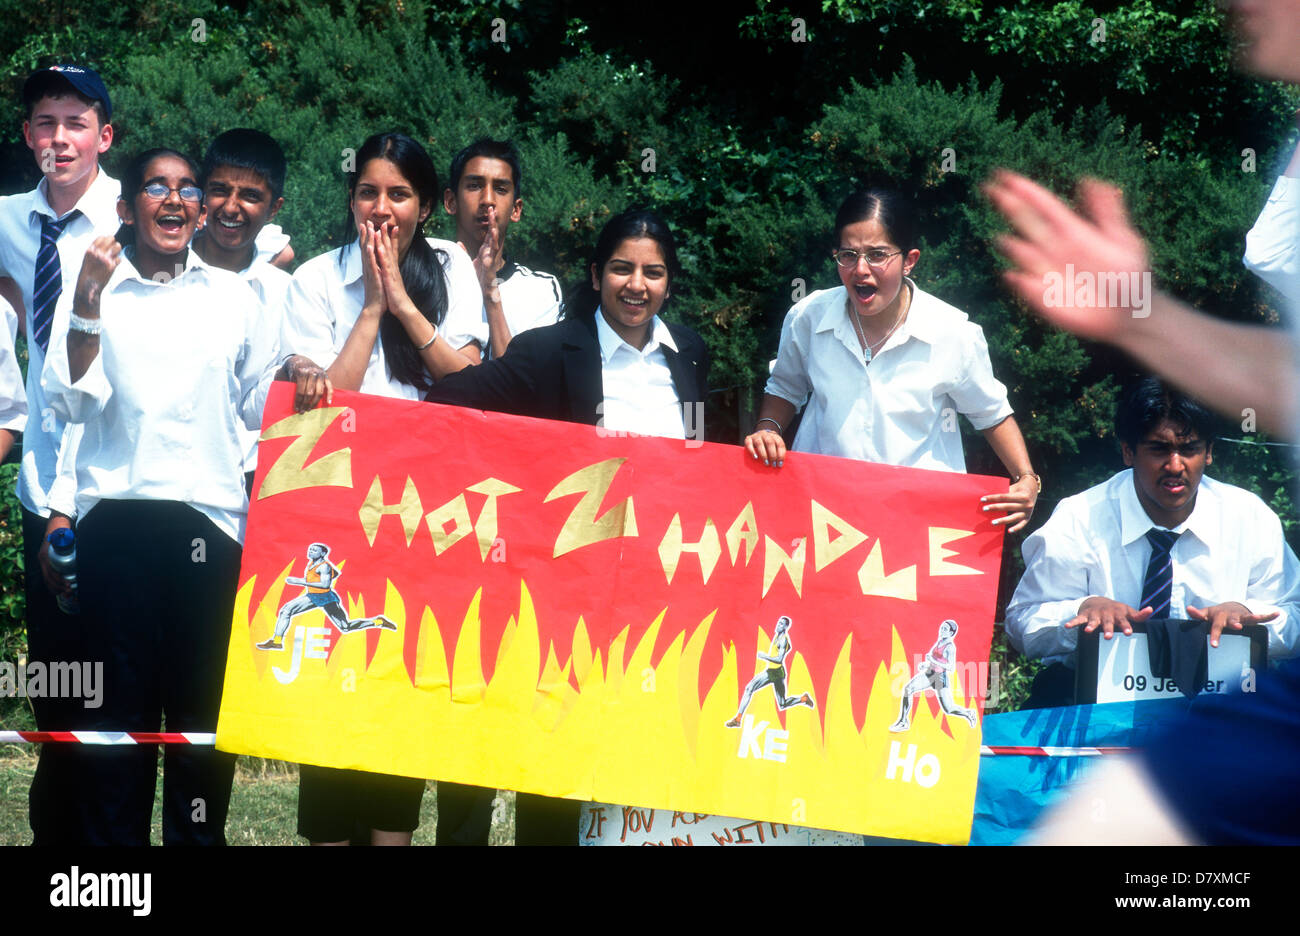 Pupils cheering on their peers during school sports day, Heathland Secondary School, Hounslow, Middlesex, UK. Stock Photo